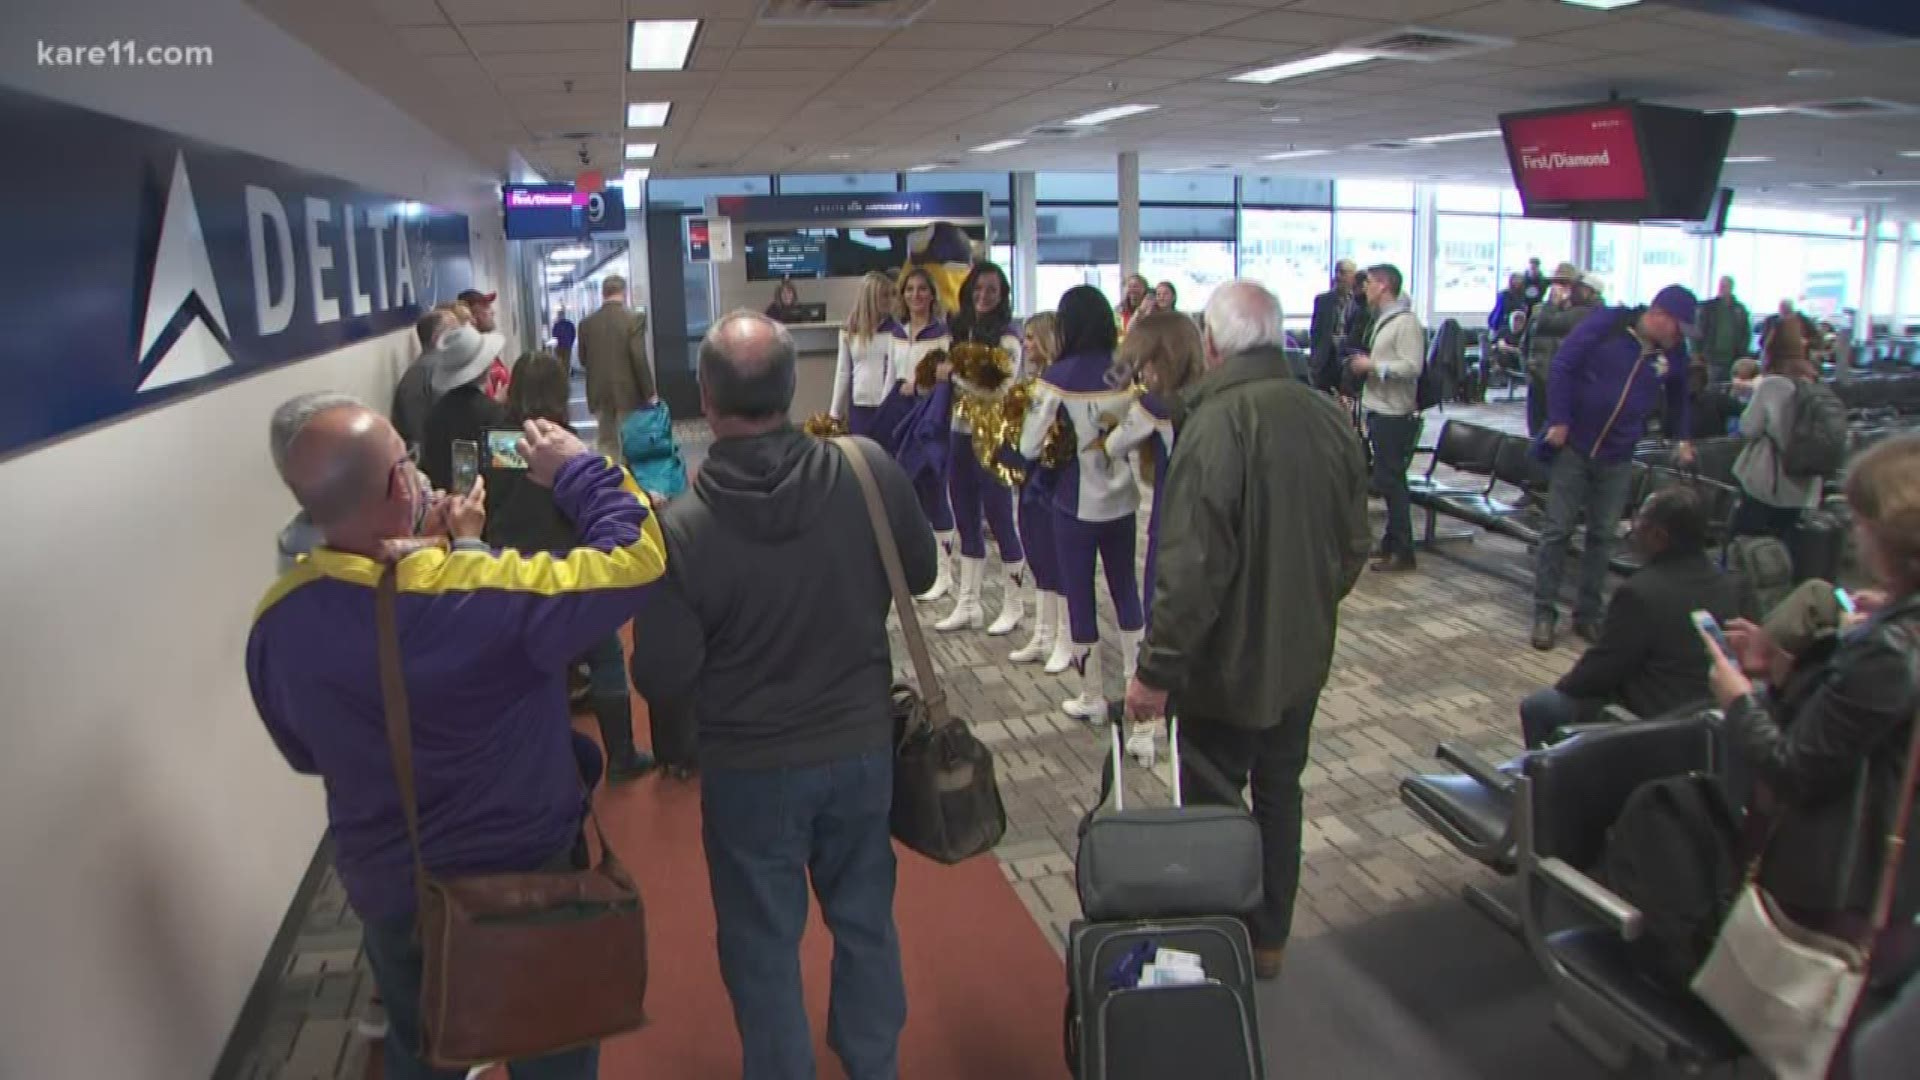 The Minnesota Vikings travel to San Francisco for Saturday's NFC playoff game against the 49ers.